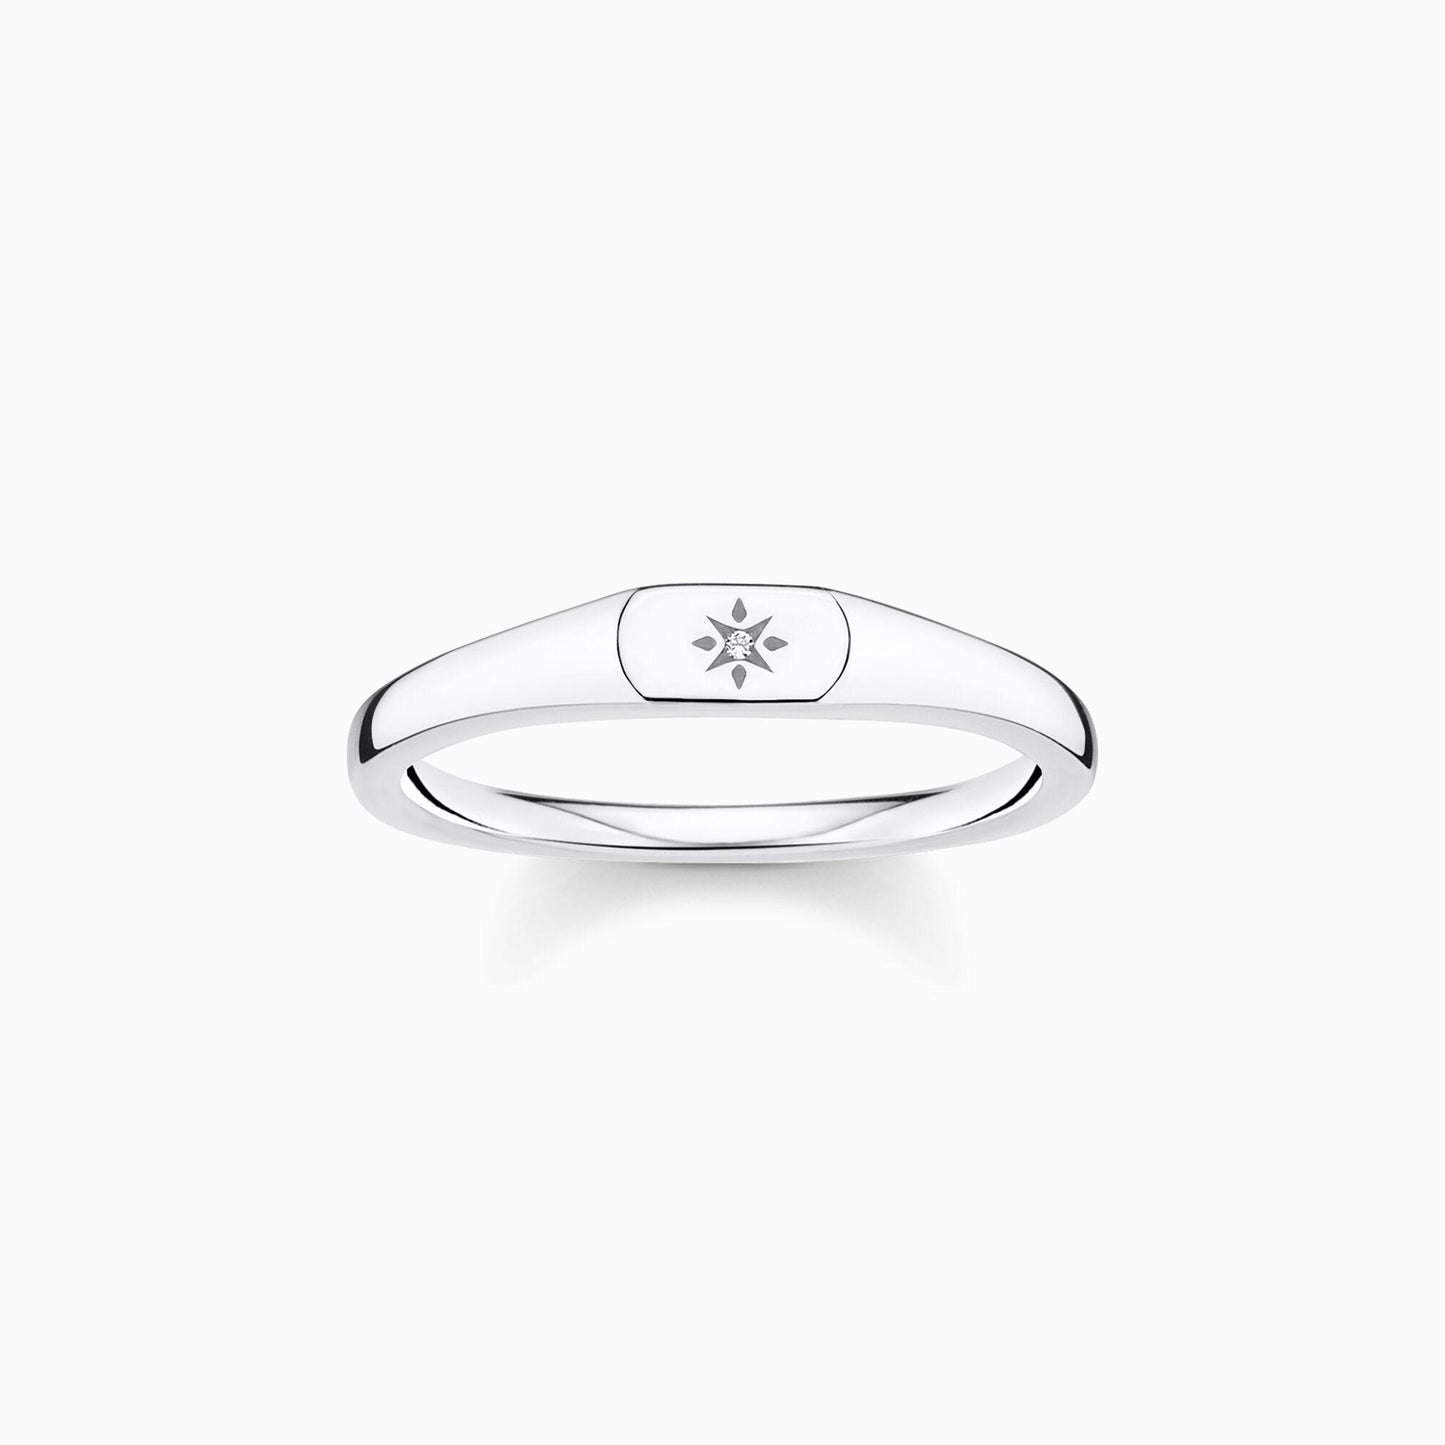 Thomas Sabo Sterling Silver Cubic Zirconia Signet Ring TR2314-051-14 - Judith Hart Jewellers